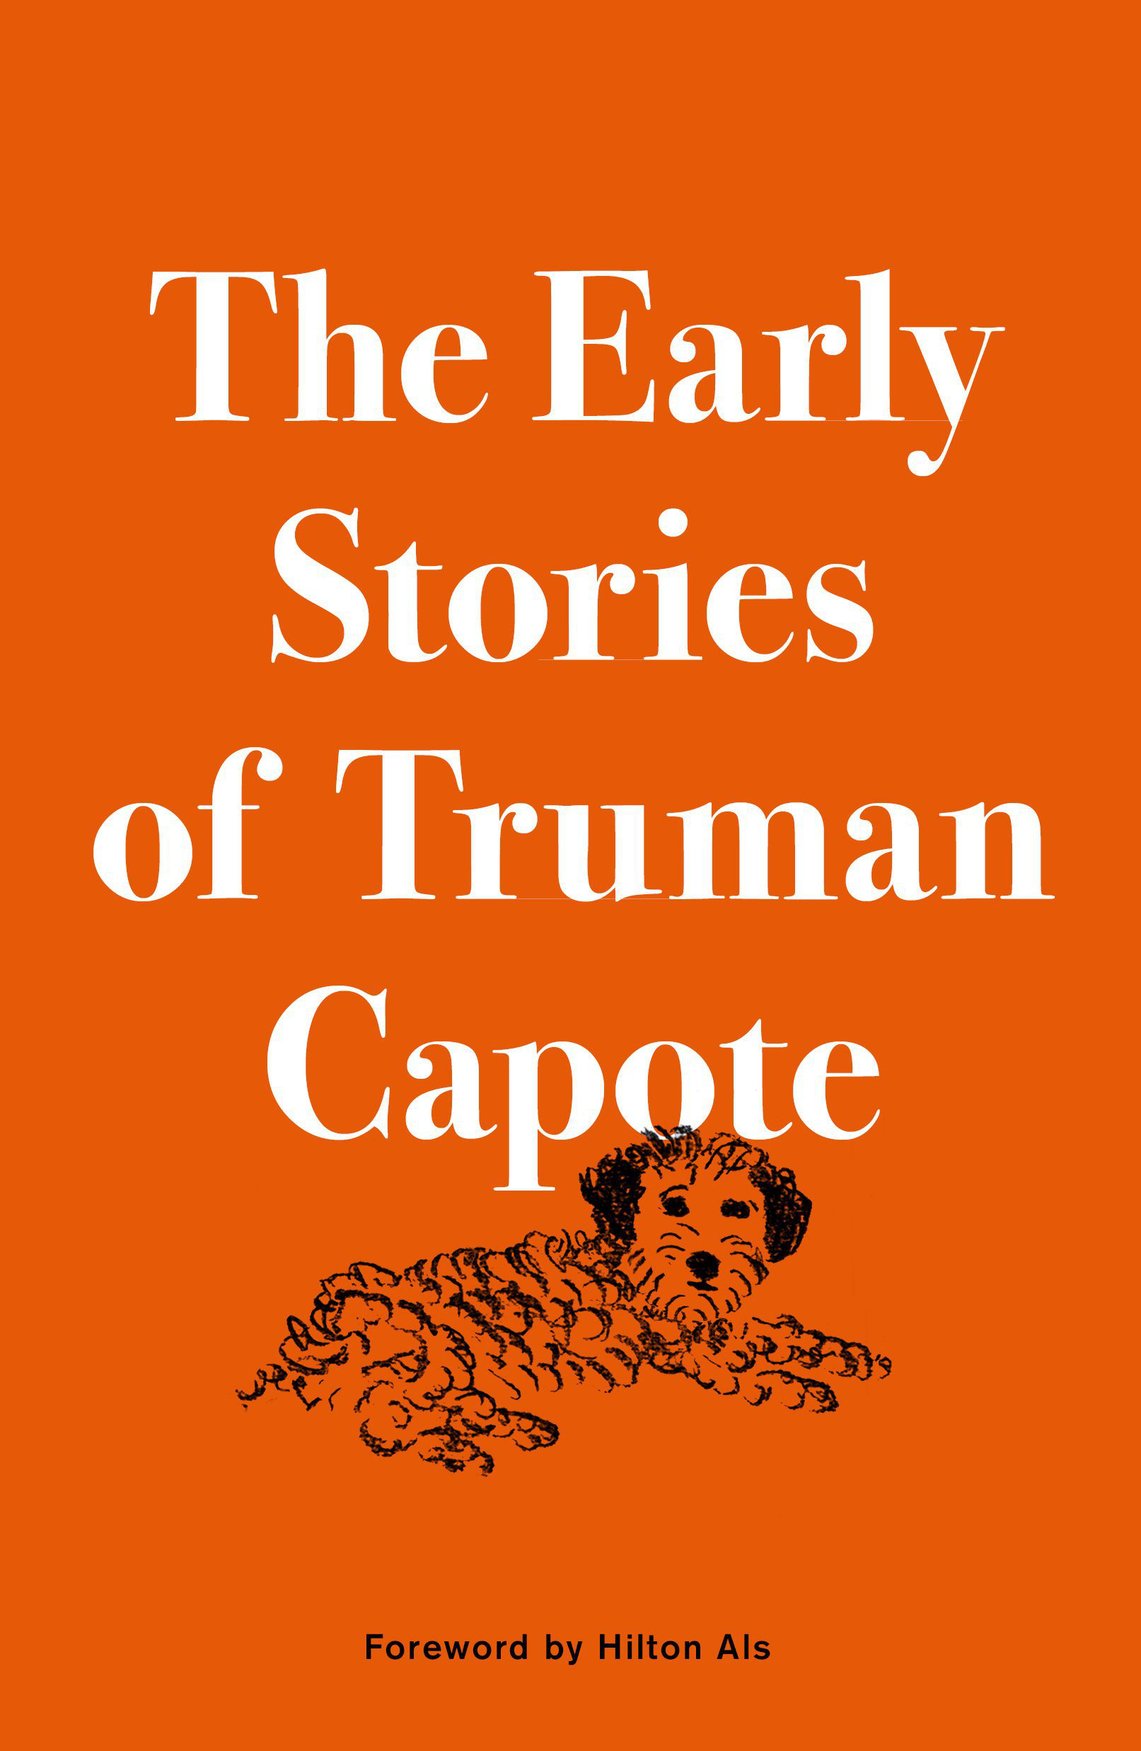 The Early Stories of Truman Capote (2015)